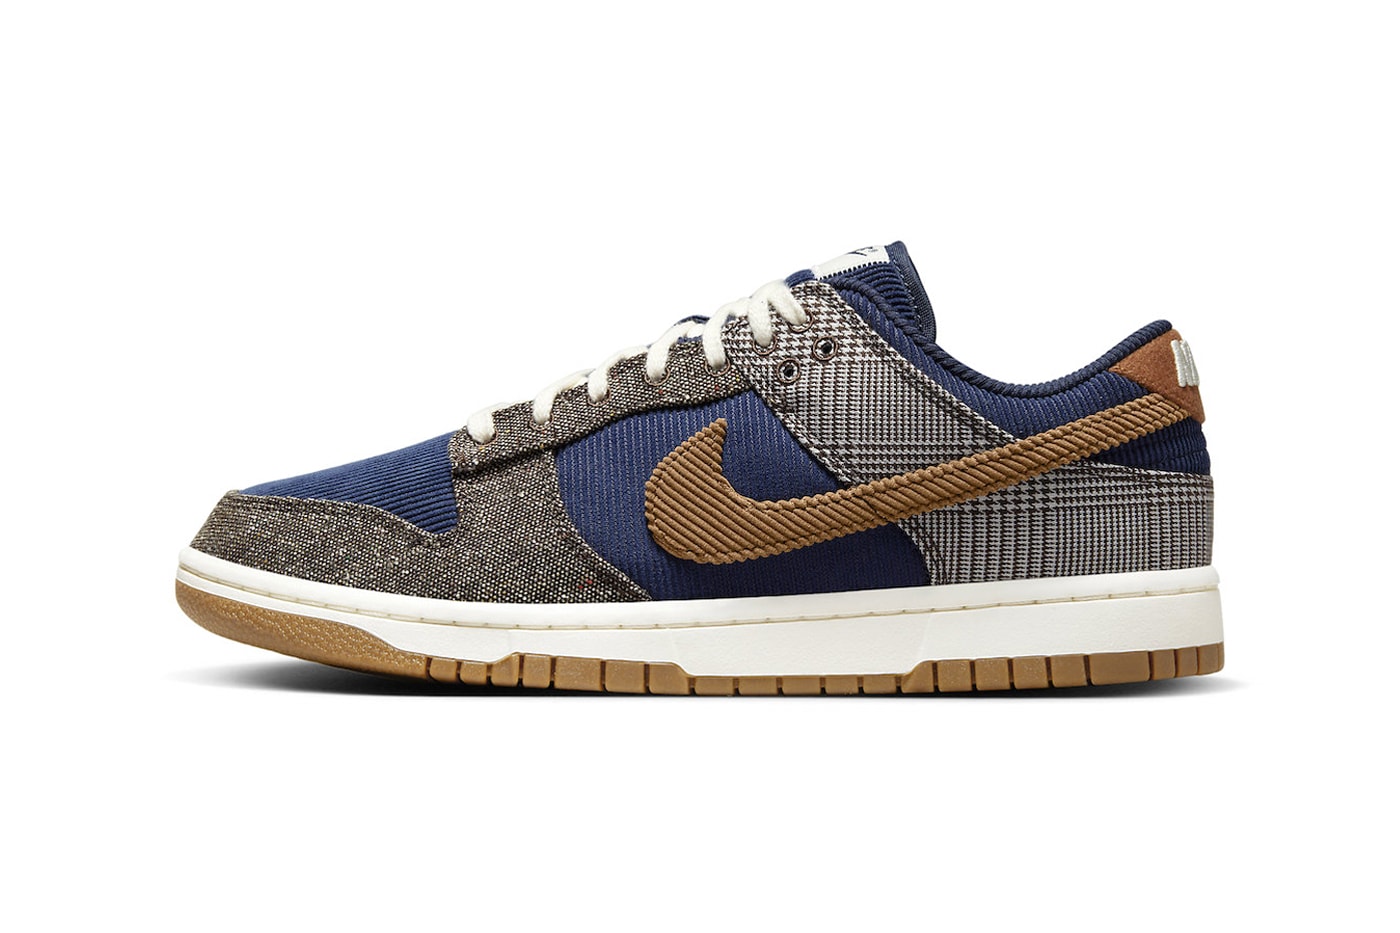 Official Look at Nike Dunk Low "Midnight Navy/Ale Brown" FQ8746-410 Midnight Navy/Ale Brown-Pale Ivory release info